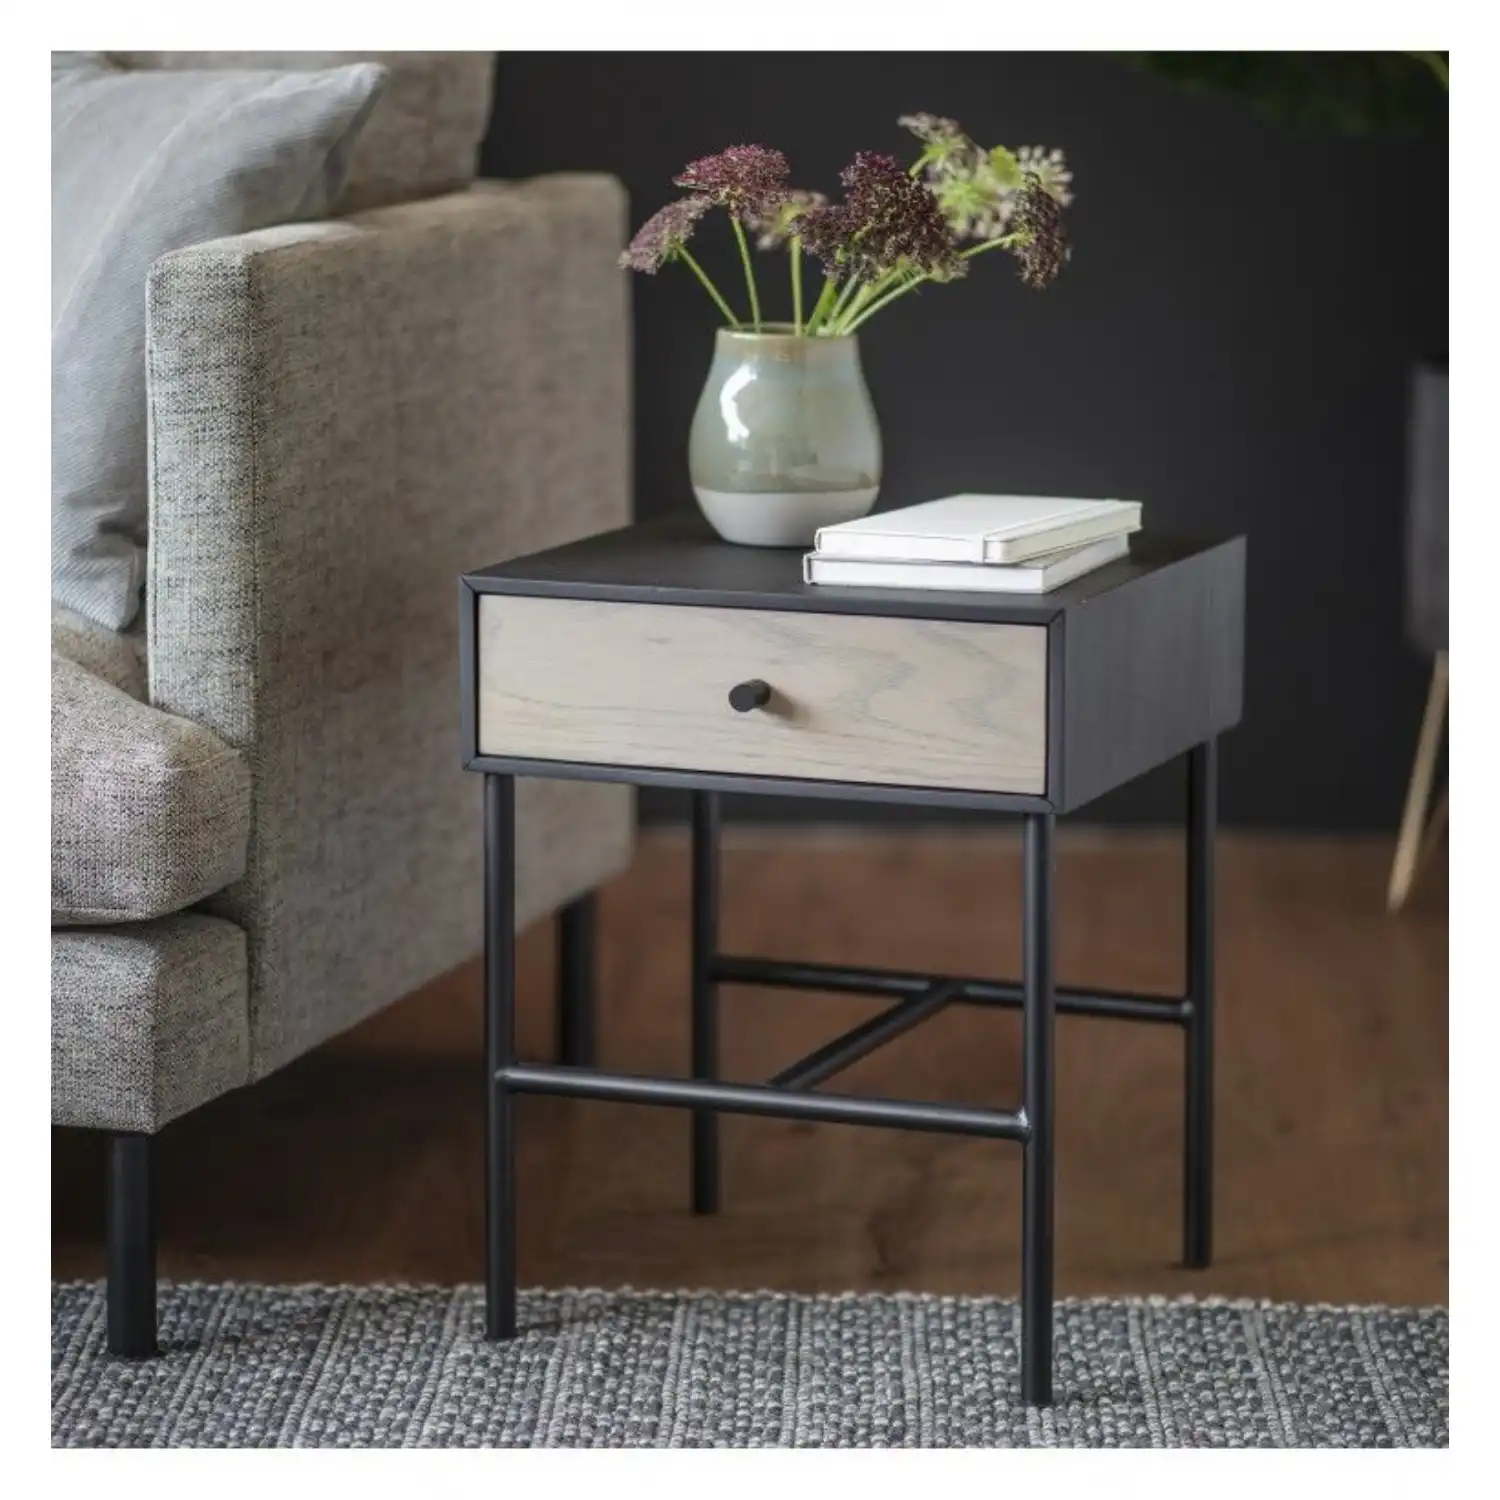 Modern Style Grey And Black Oak Wood Panel Bedside Table With Drawer 50x40cm